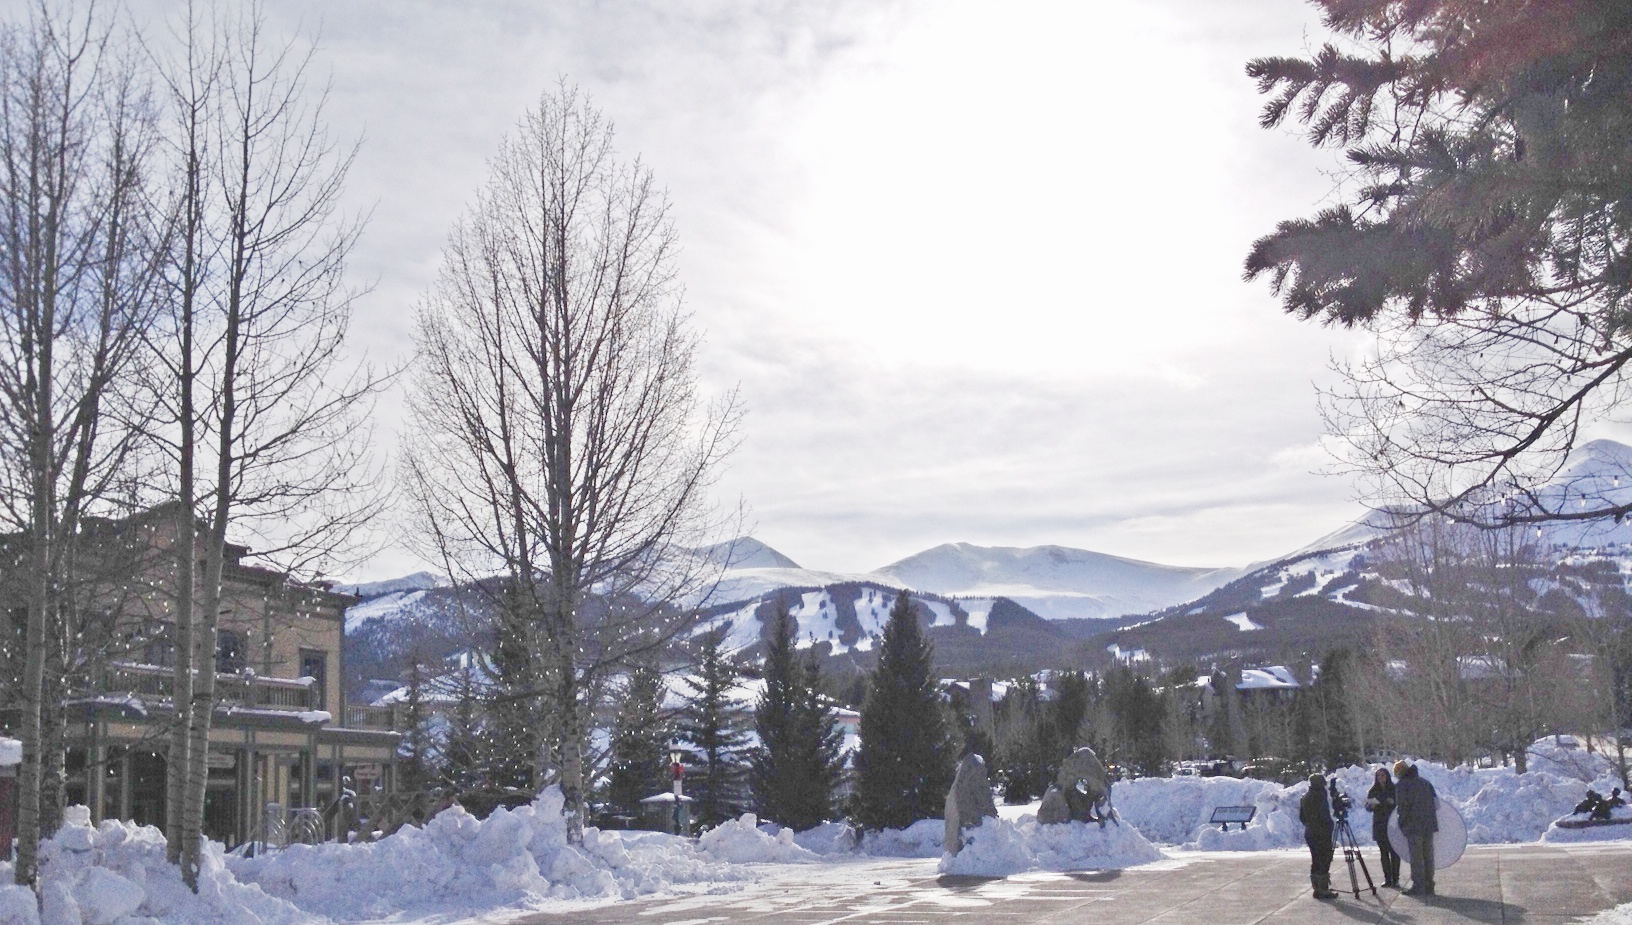 36 Hours in Breckenridge or How to make to most of a ski trip by yourself